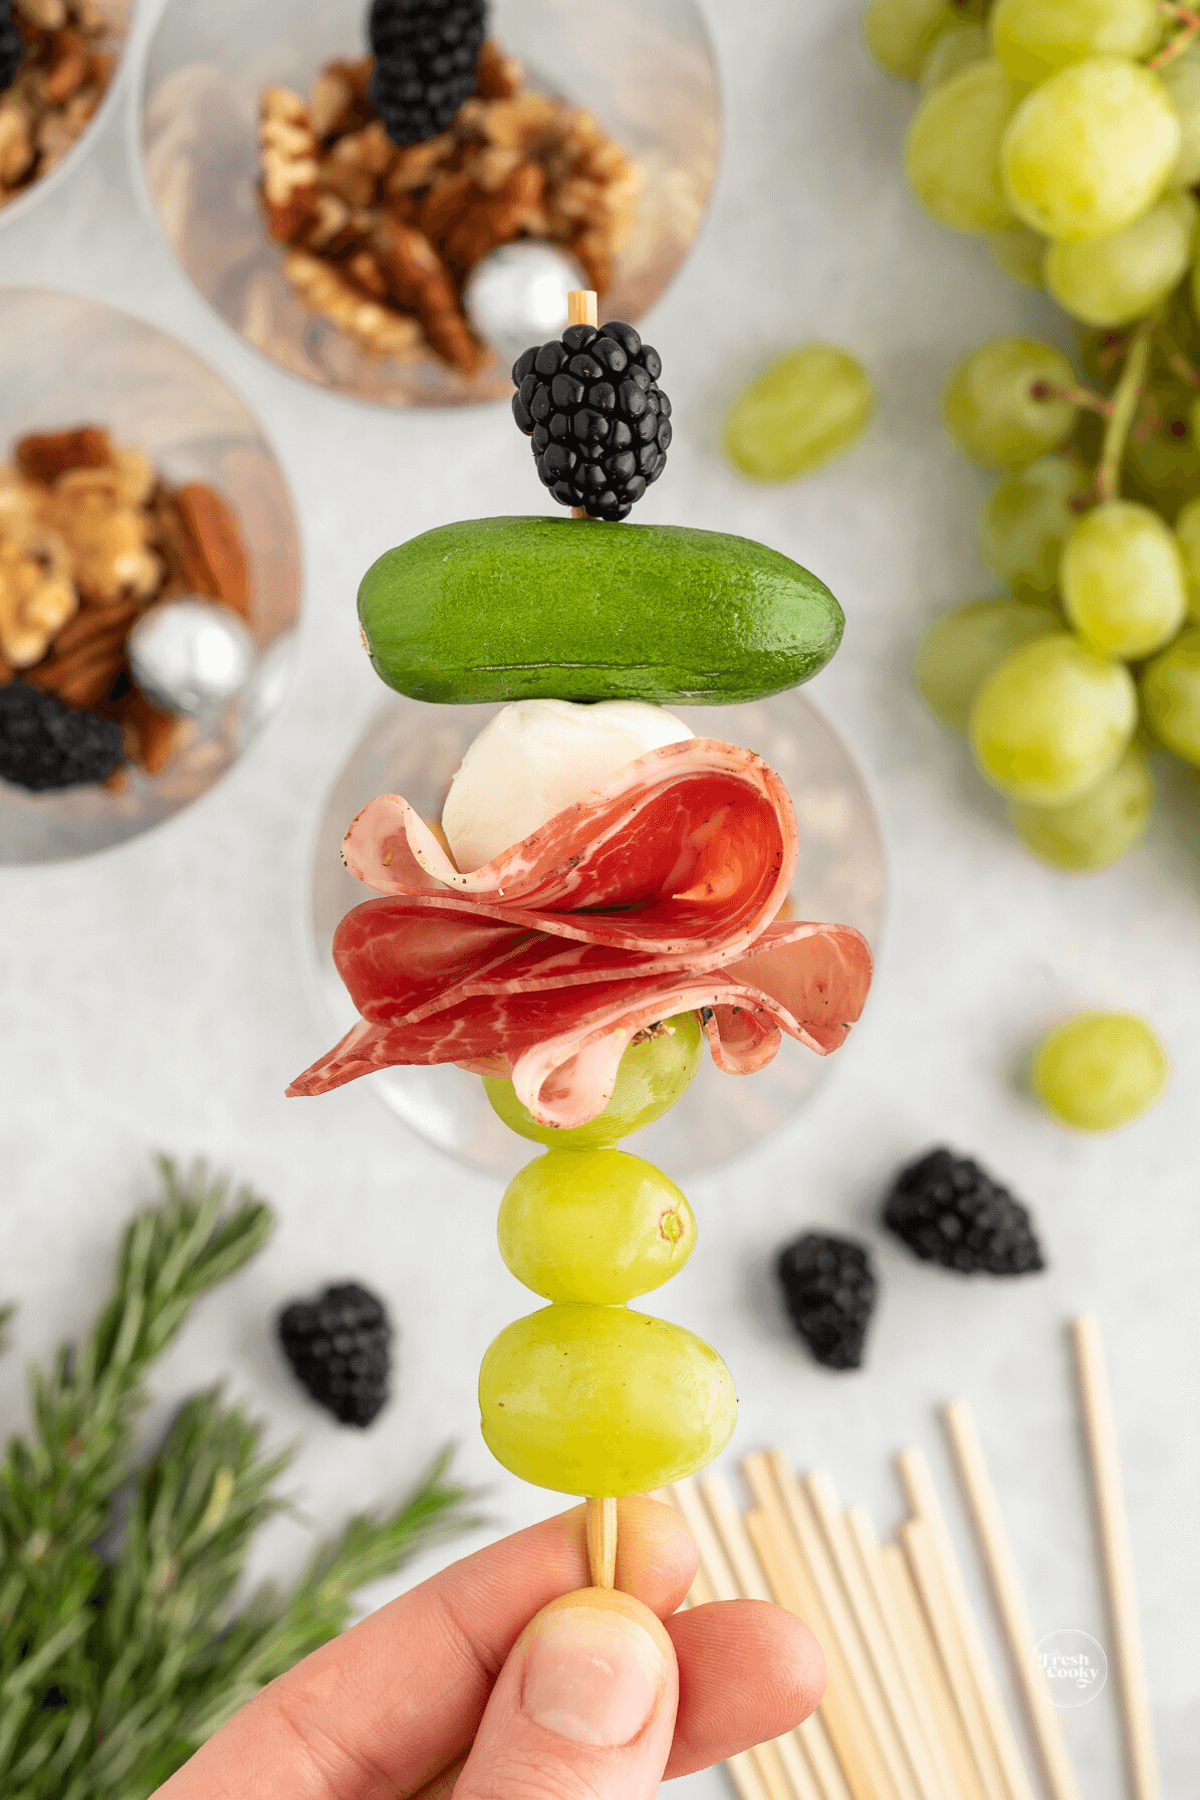 Hand holding skewer packed with grapes, salami, baby mozzarella, mini cucumber, blackberry.